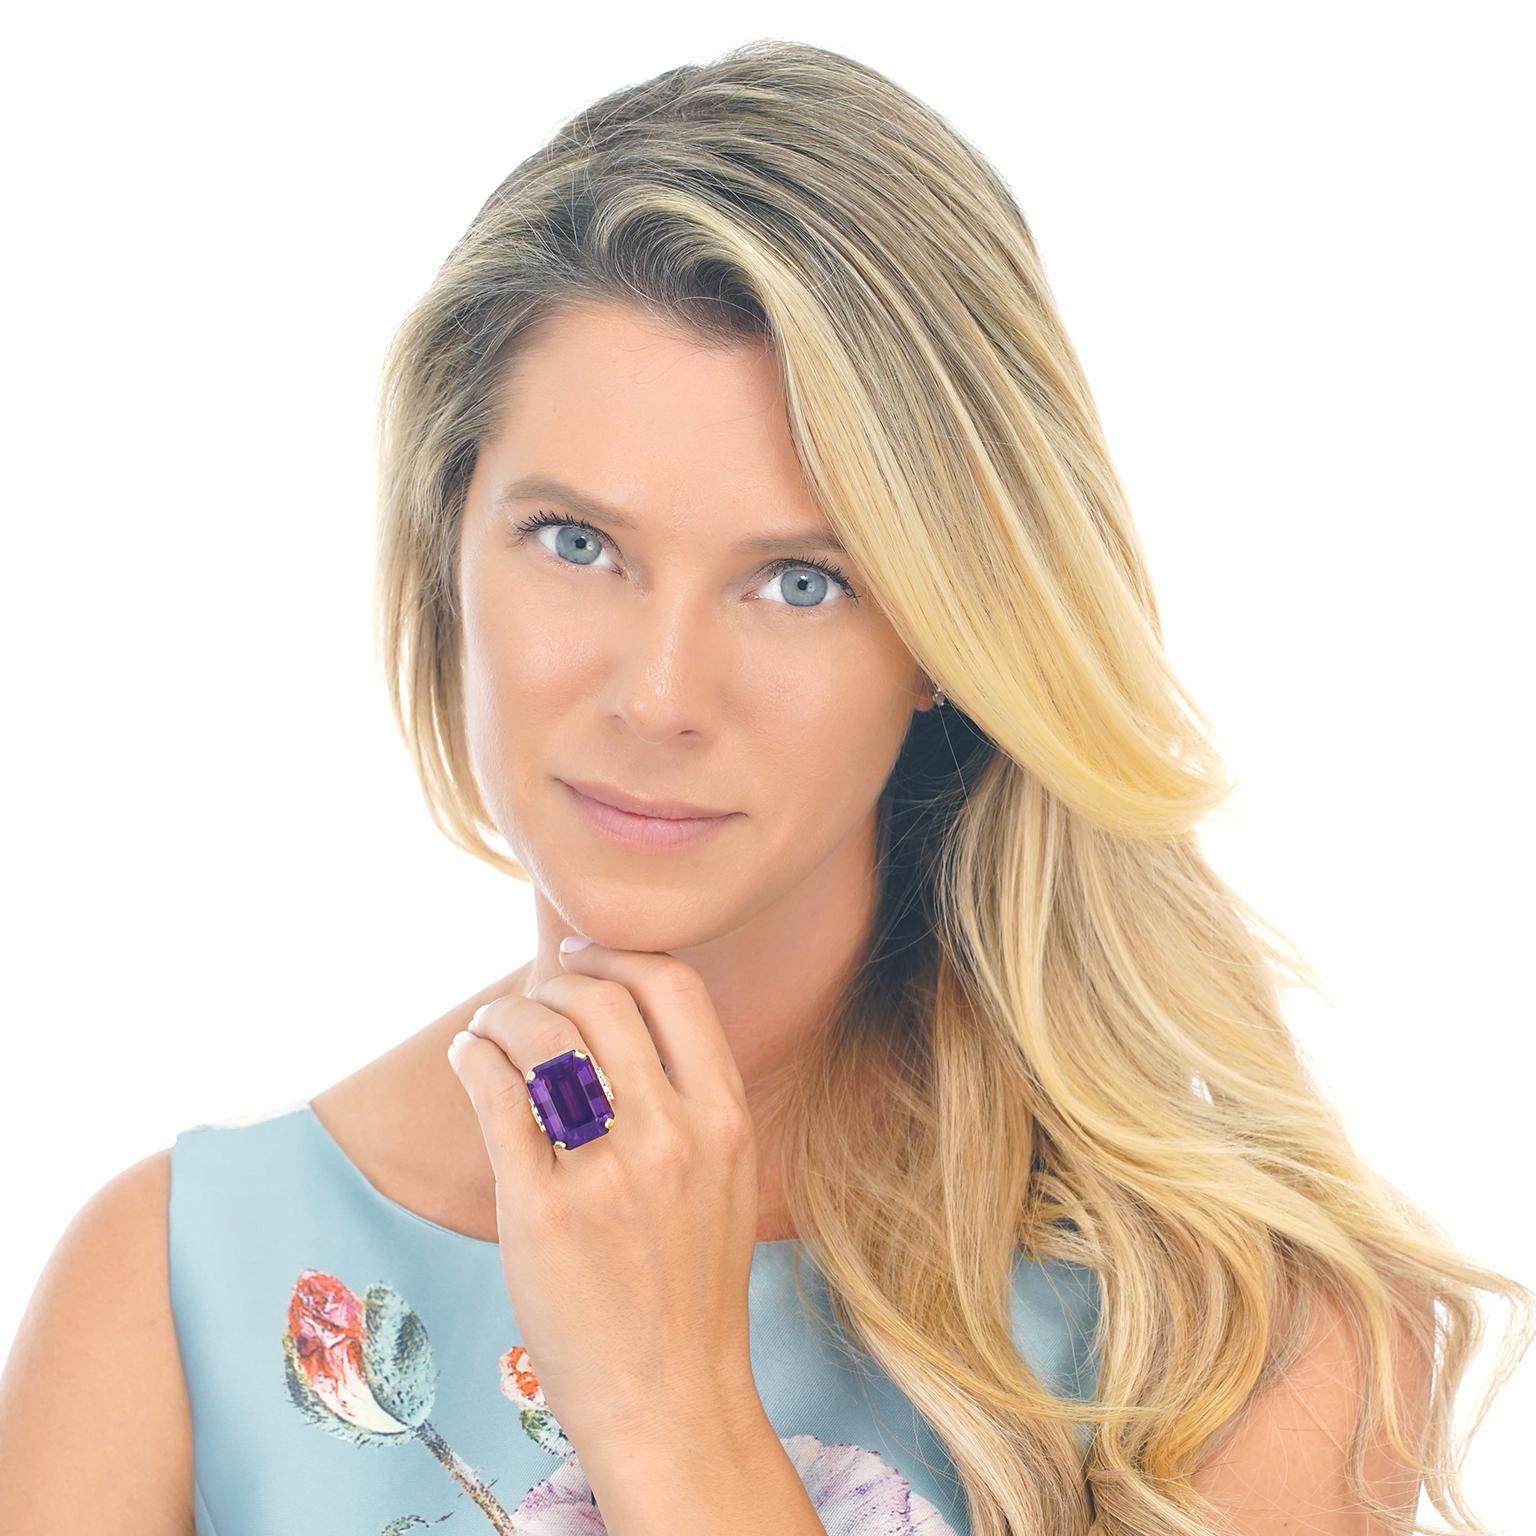 Circa 1950s, 14k, American. Retro meets modern in this sleek jewel featuring a dazzlingly large, richly colored 37.80 carat amethyst. Perfectly showcased by an elegantly understated setting, the look is glamorously chic. Superbly made in